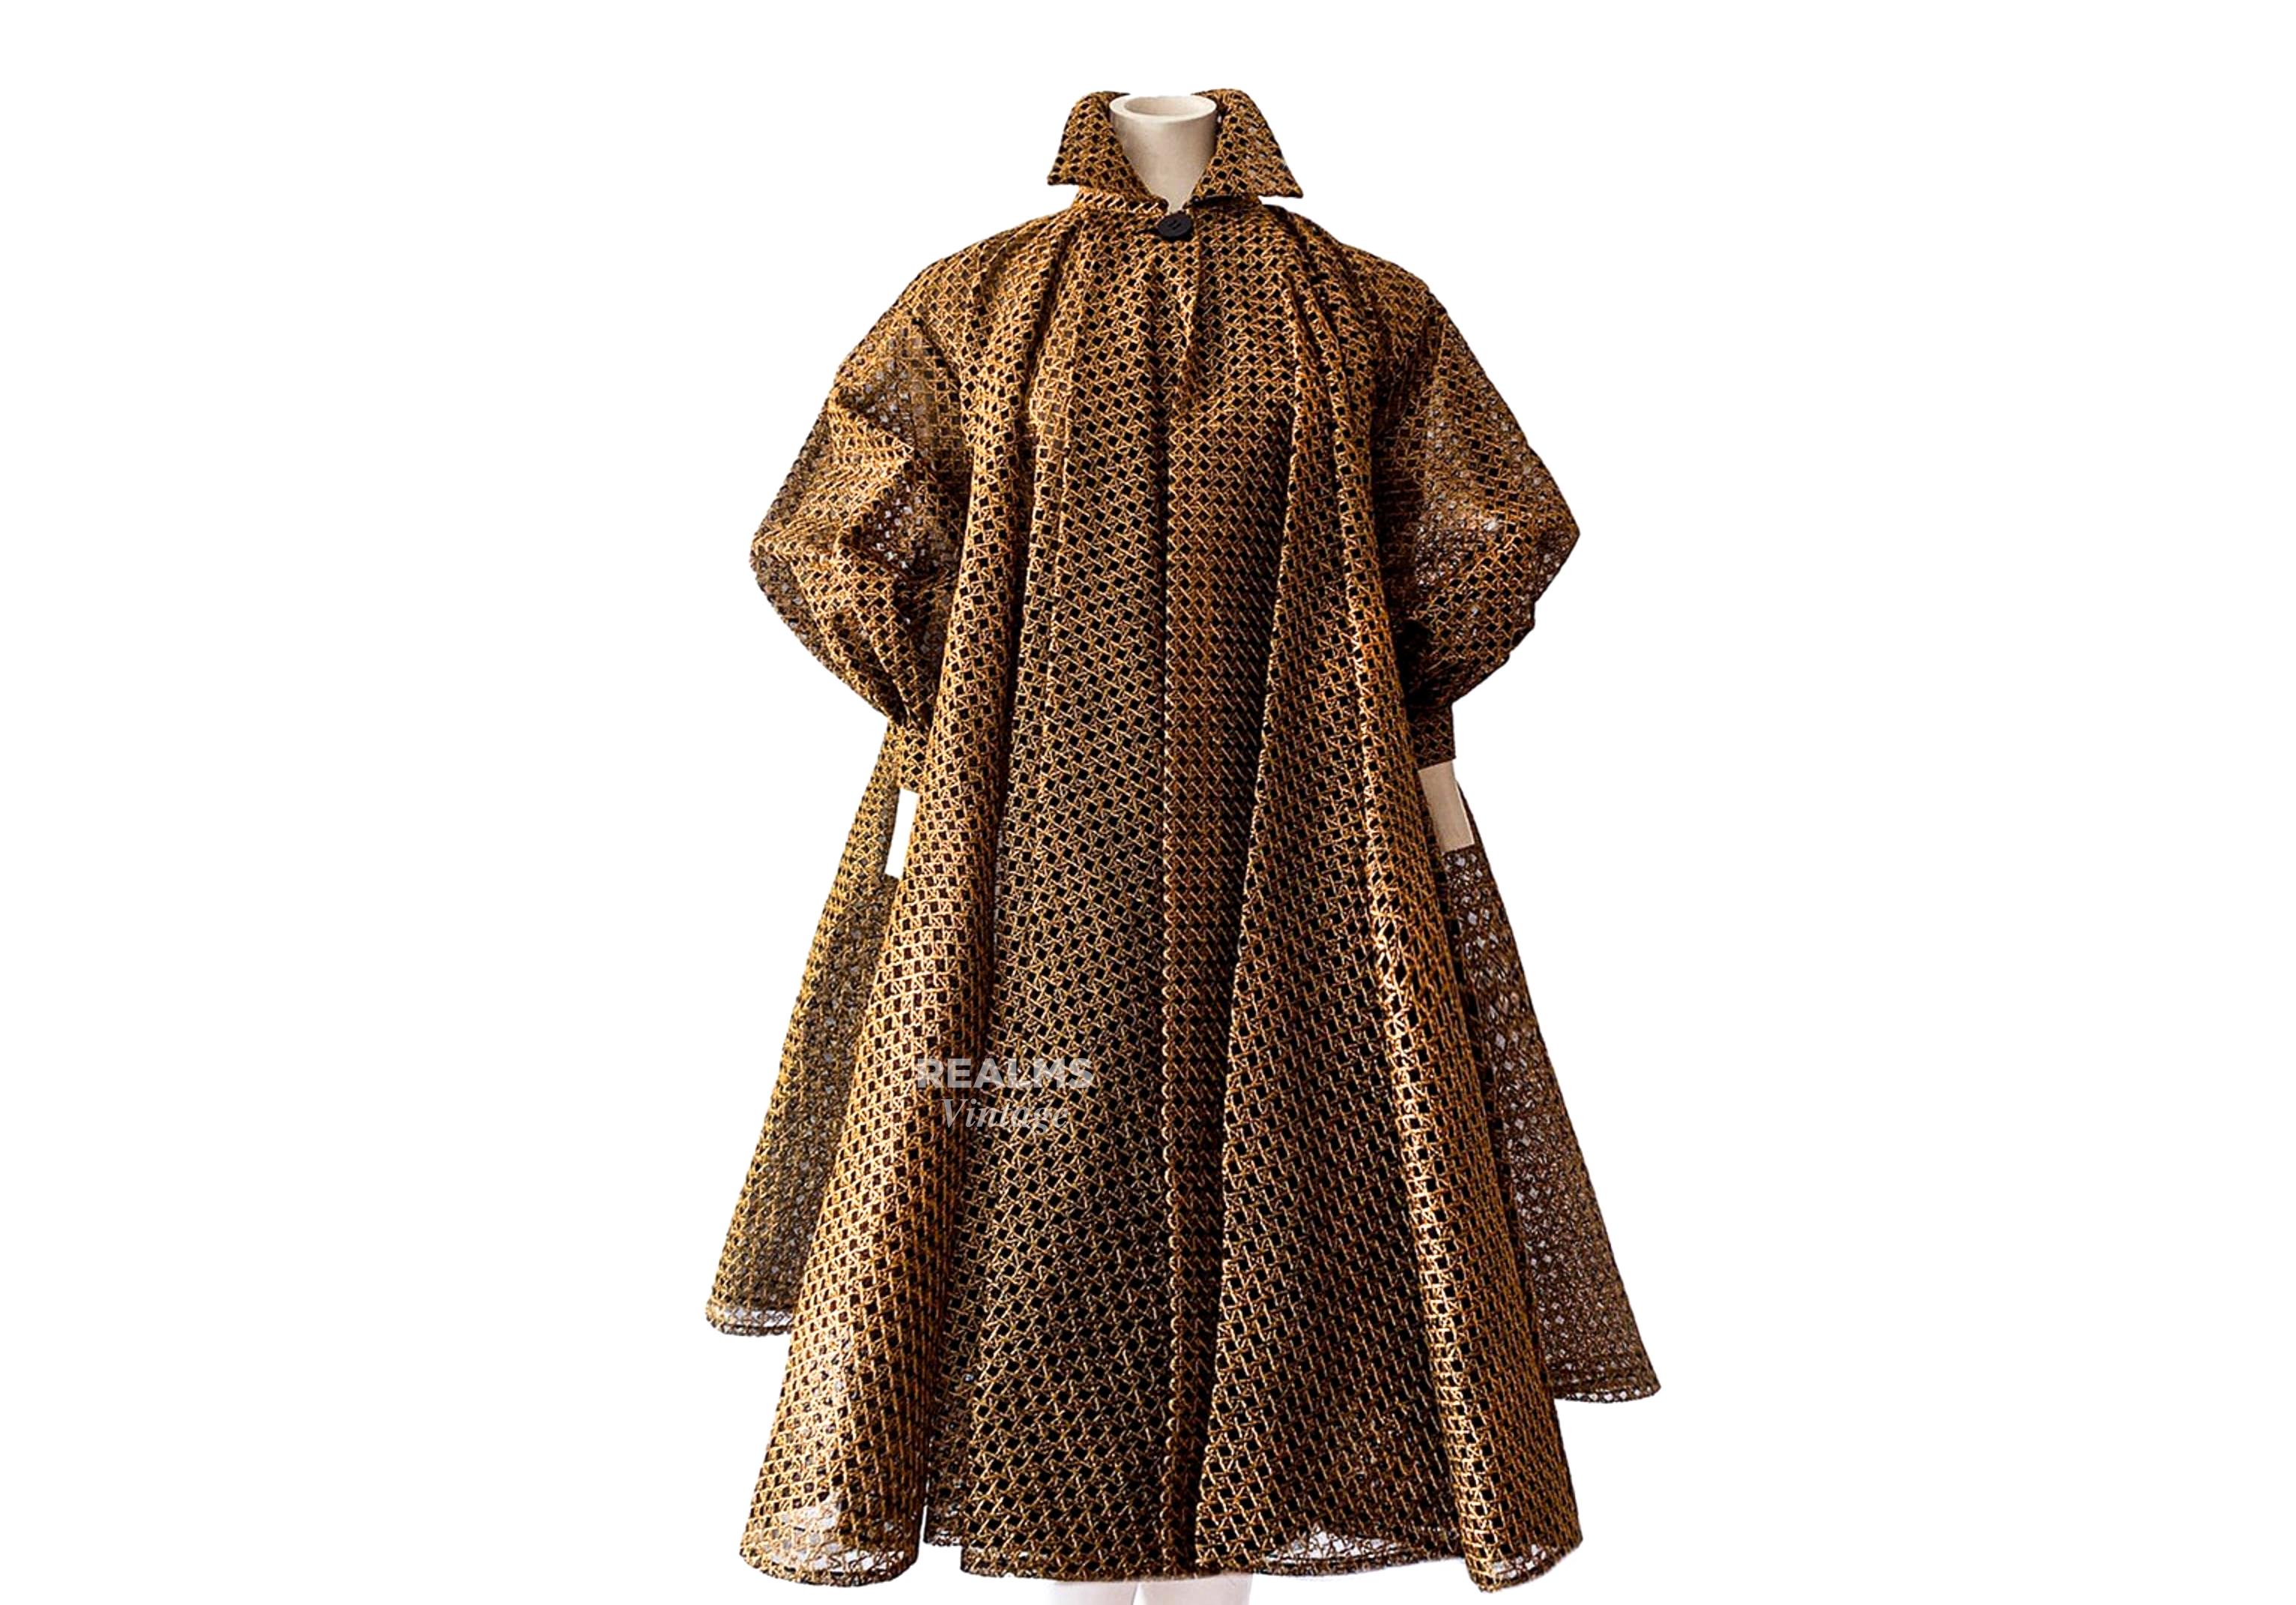 CHRISTIAN DIOR Archival SS 1991 Spectacular Coat Dress Swing Overcoat  For Sale 4